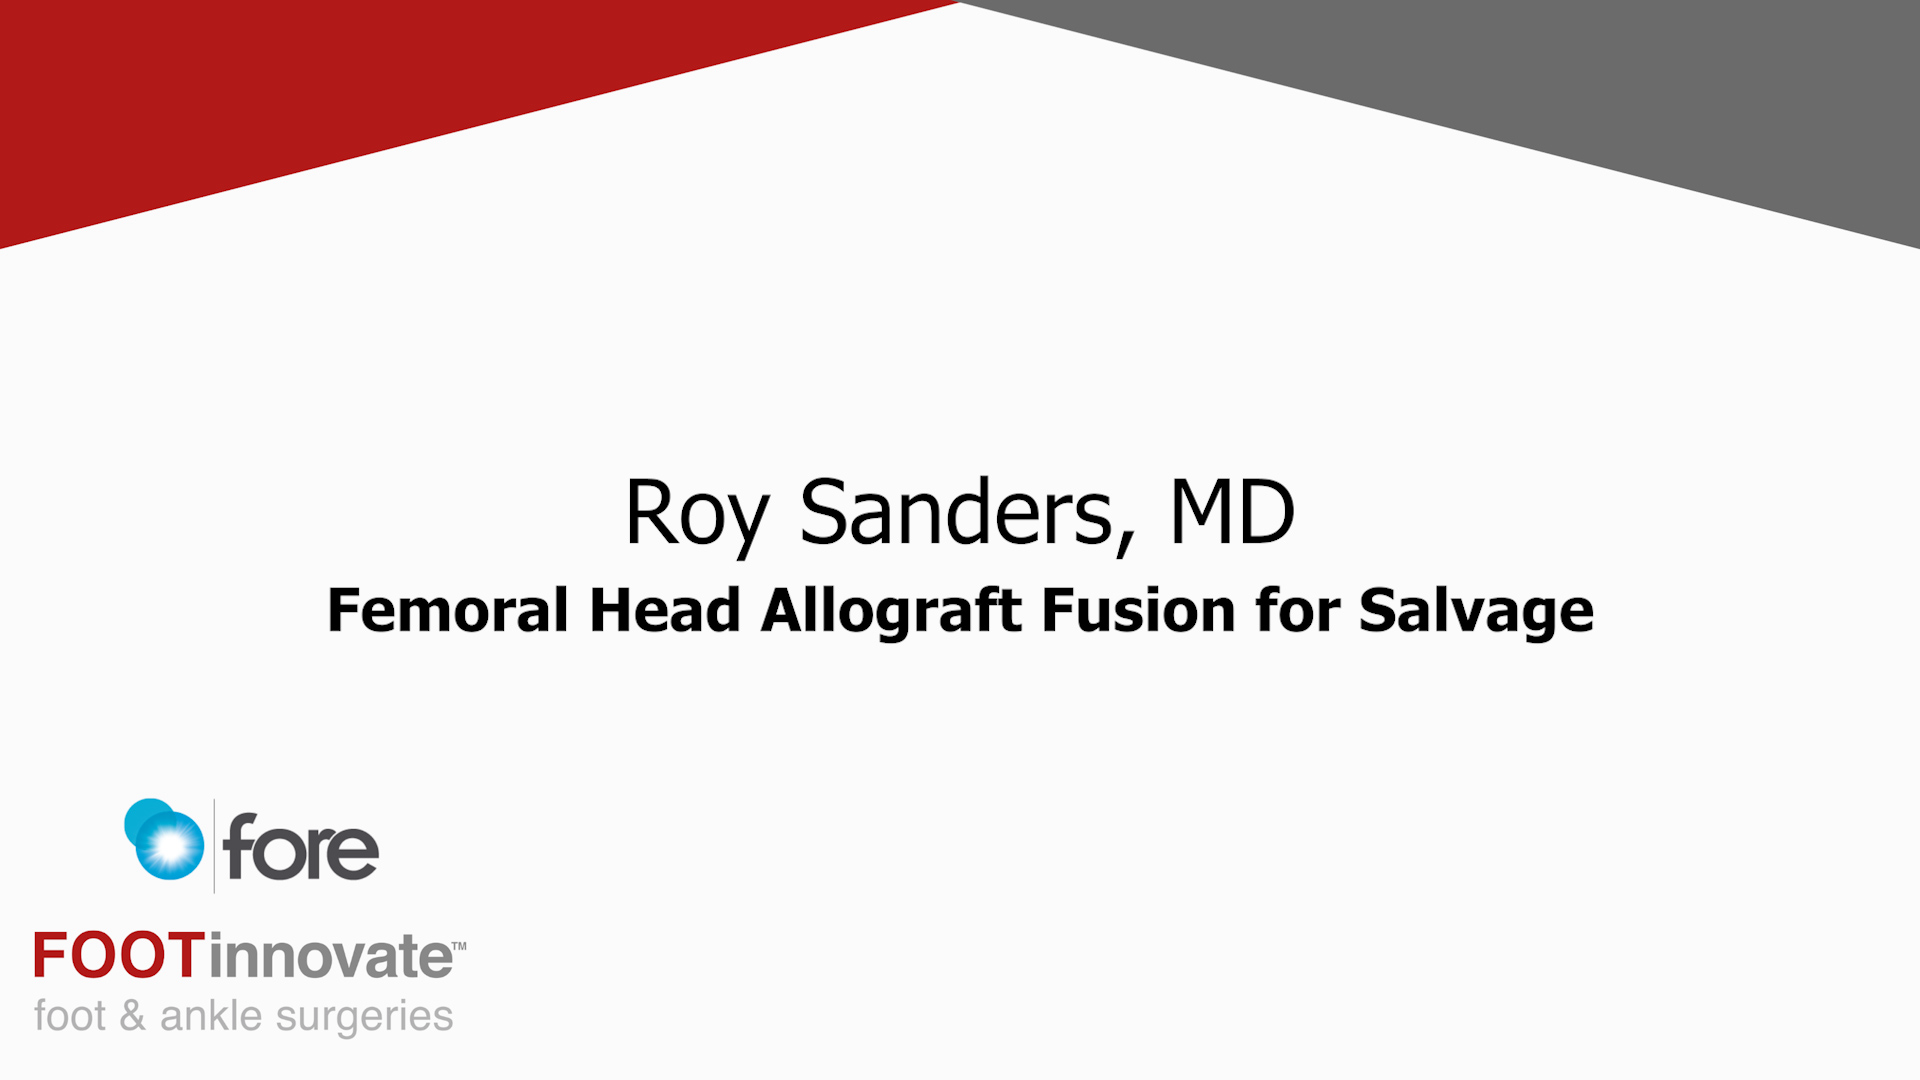 FORE TAR Summit: Femoral Head Allograft Fusion for Salvage